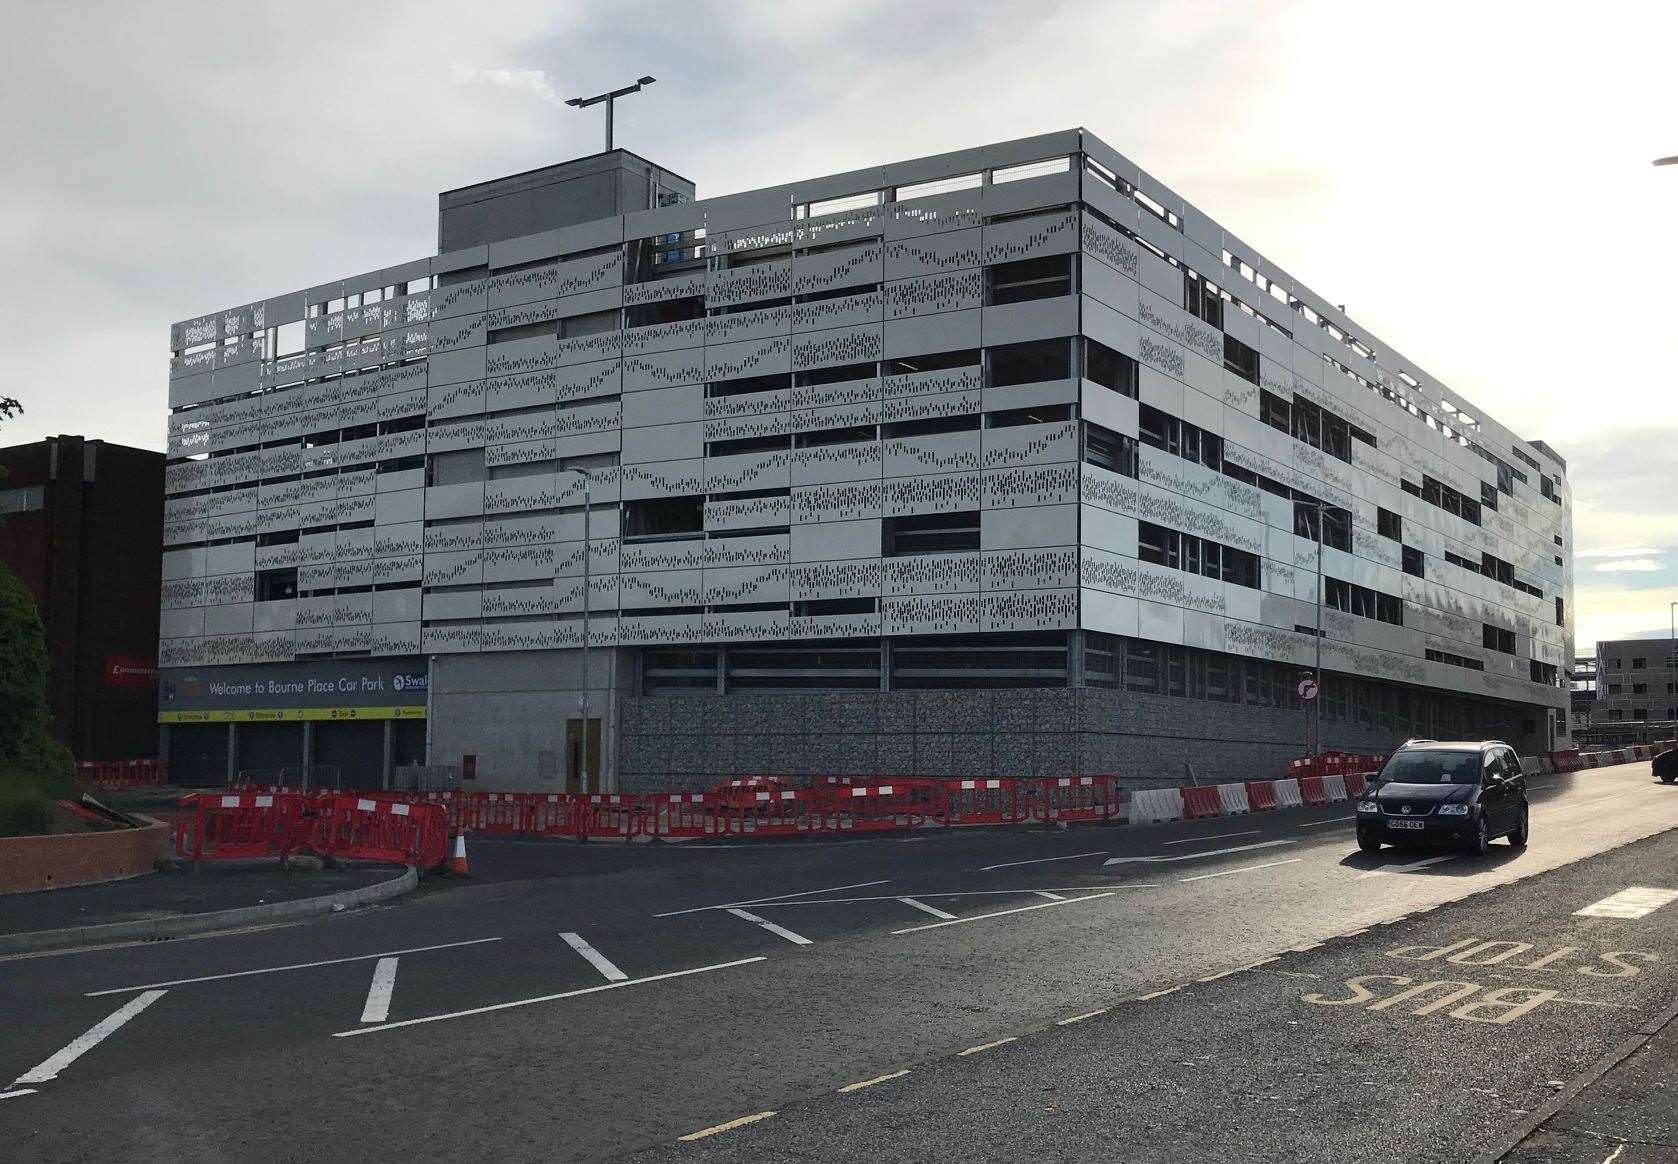 The multi-storey car park is set to open in summer